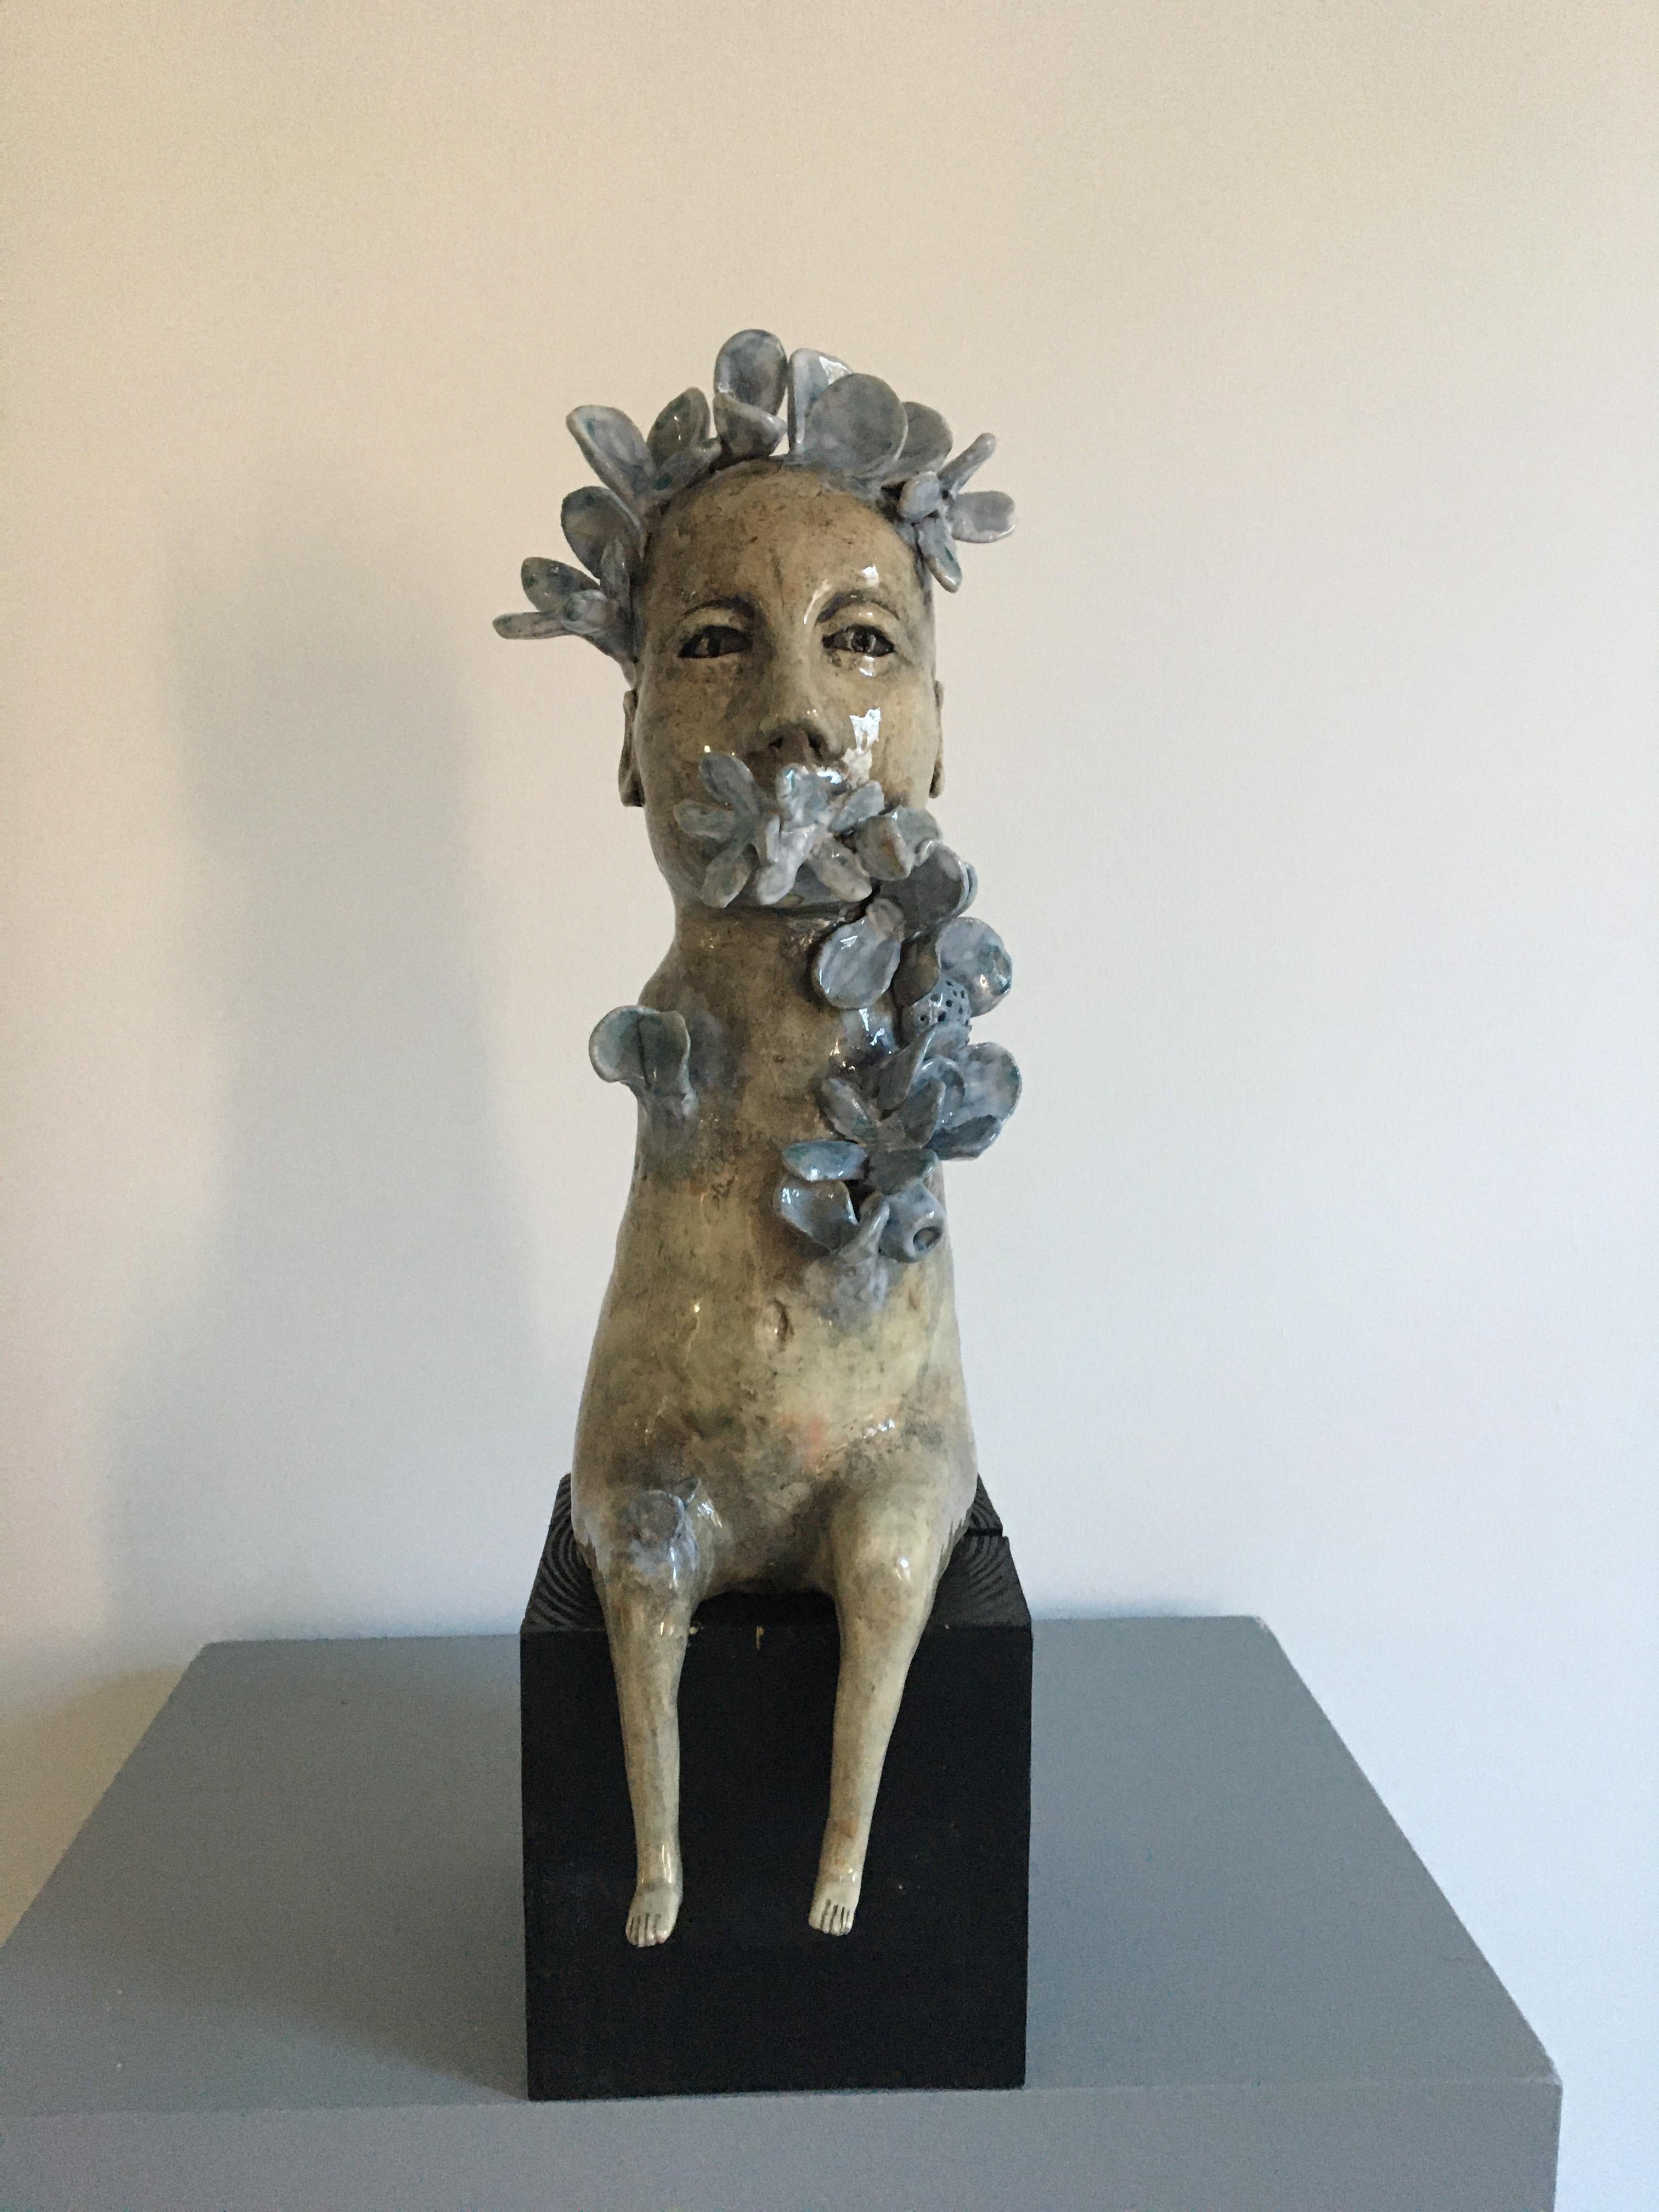 Ashley Benton Figurative Sculpture - Ceramic figure: 'Let go of expectations and experience the subtle and unbounded'